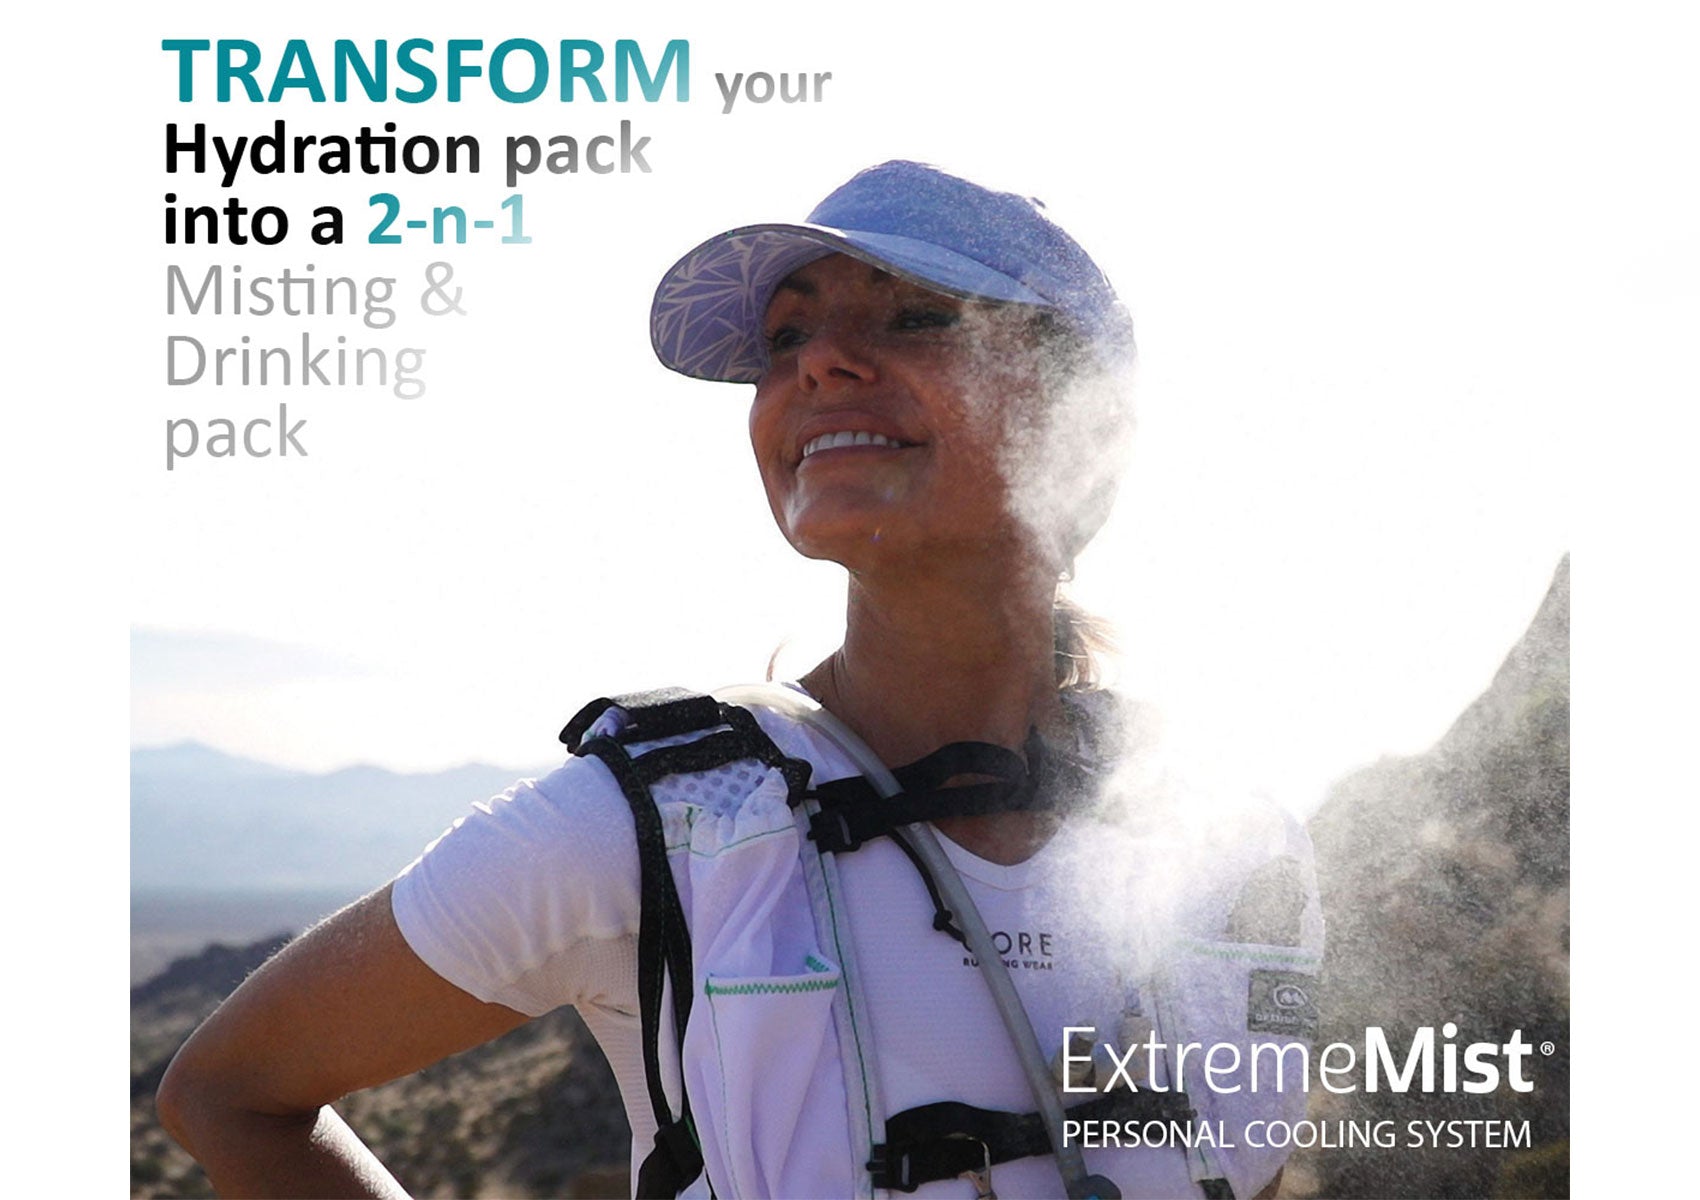 transform your hydration pack into a 2-n-1 misting & drinking pack